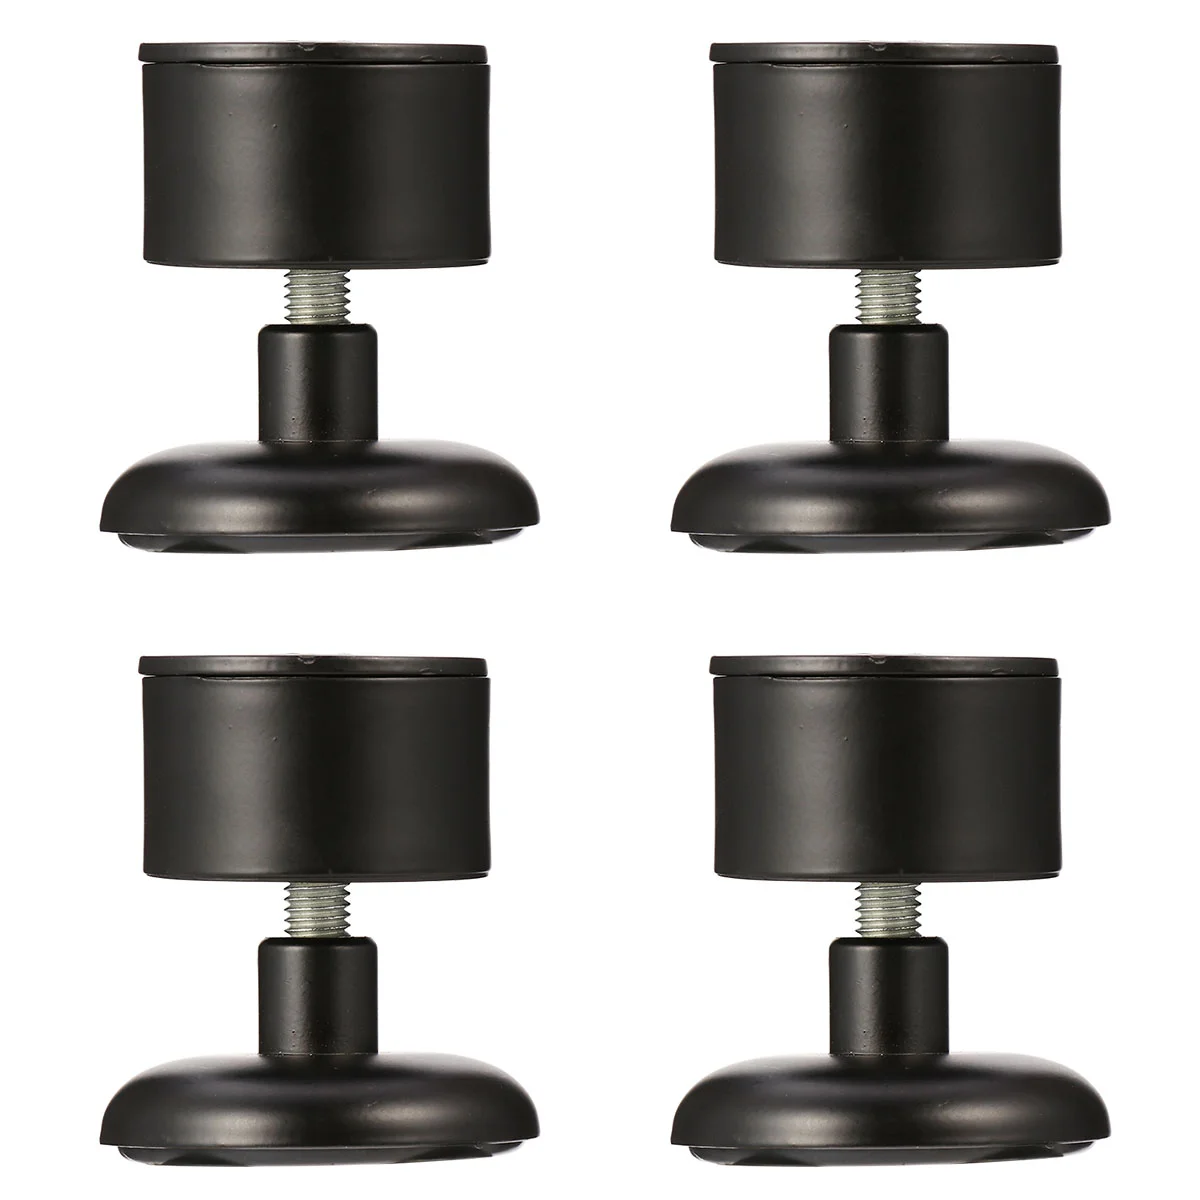 

4 Pcs Adjustable Feet Support Cabinet Legs Stainless Steel Sofa Round Stand Cupboard Height Furniture